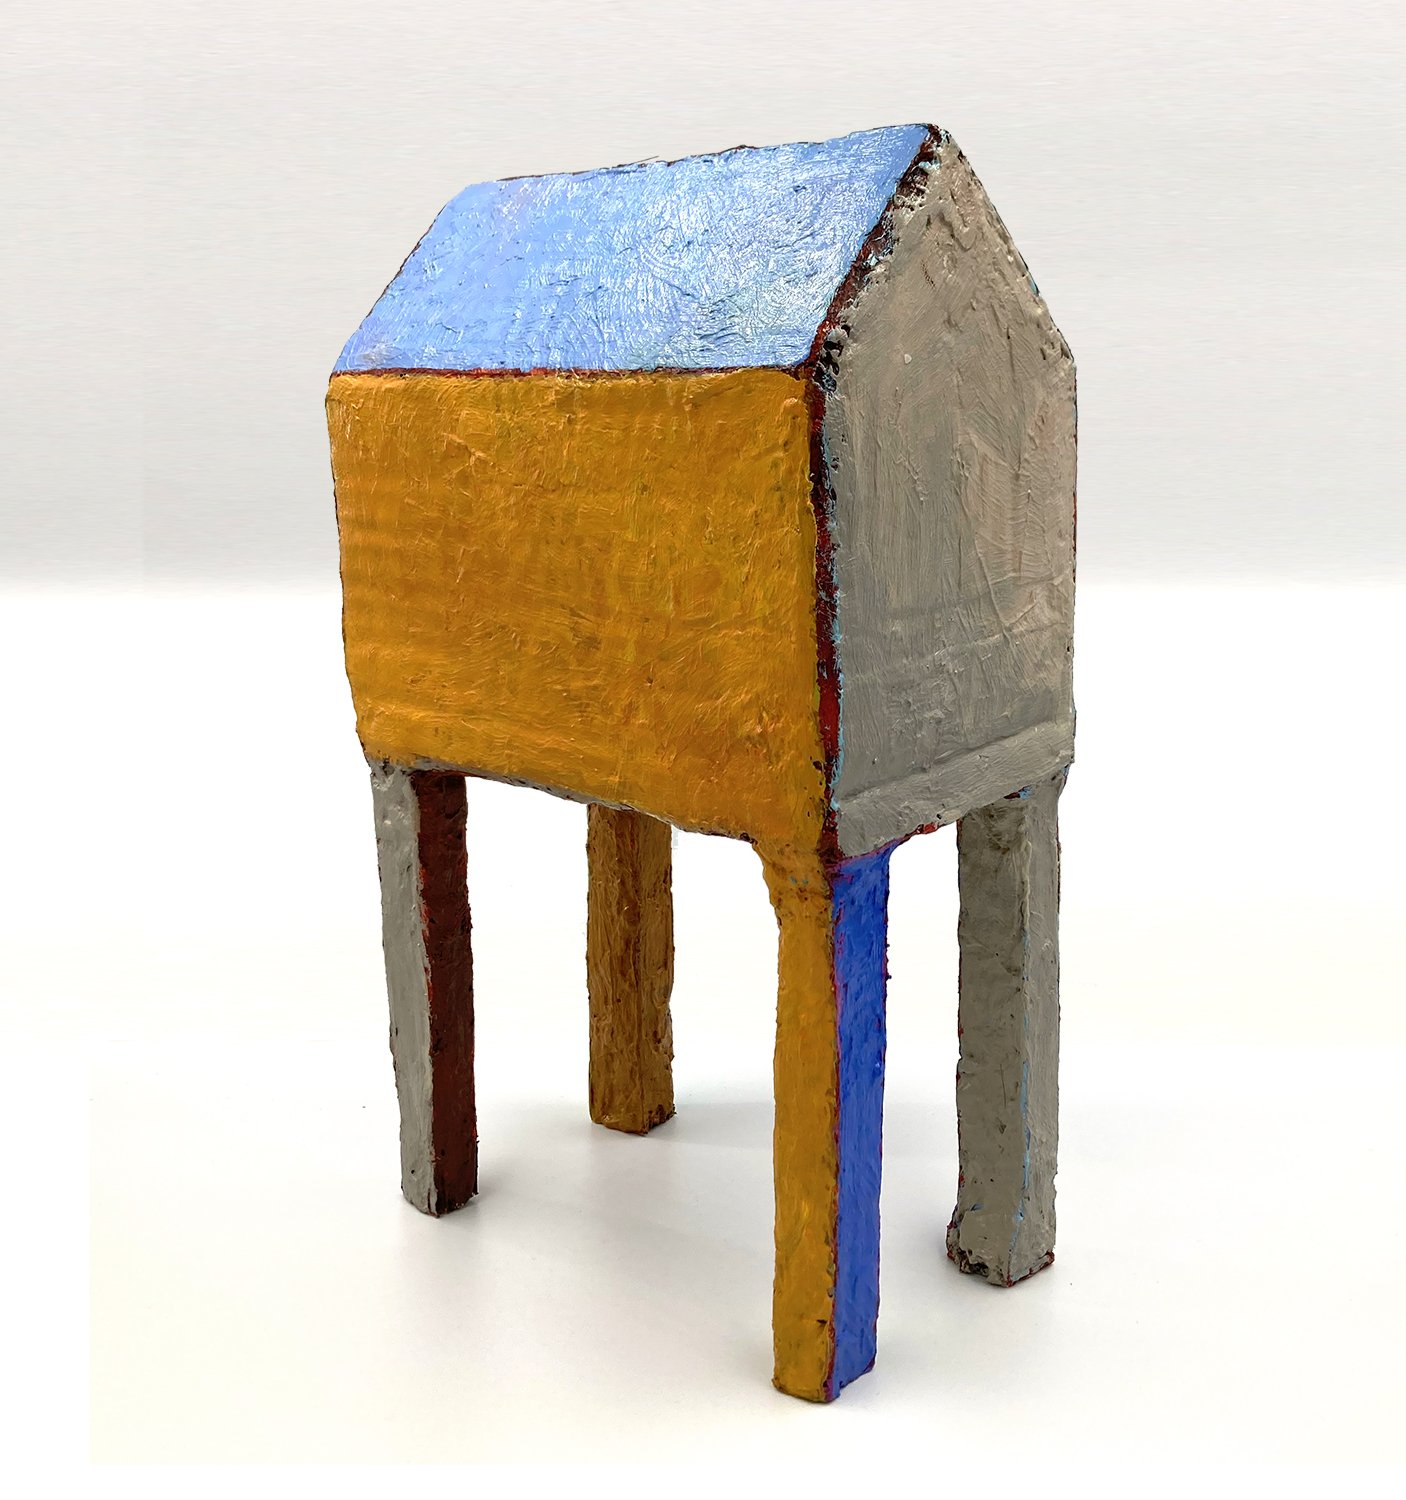  THREE-5 (2023), oil, modelling paste, cardboard cm: 18.5w x  30h x 11d Private collection  